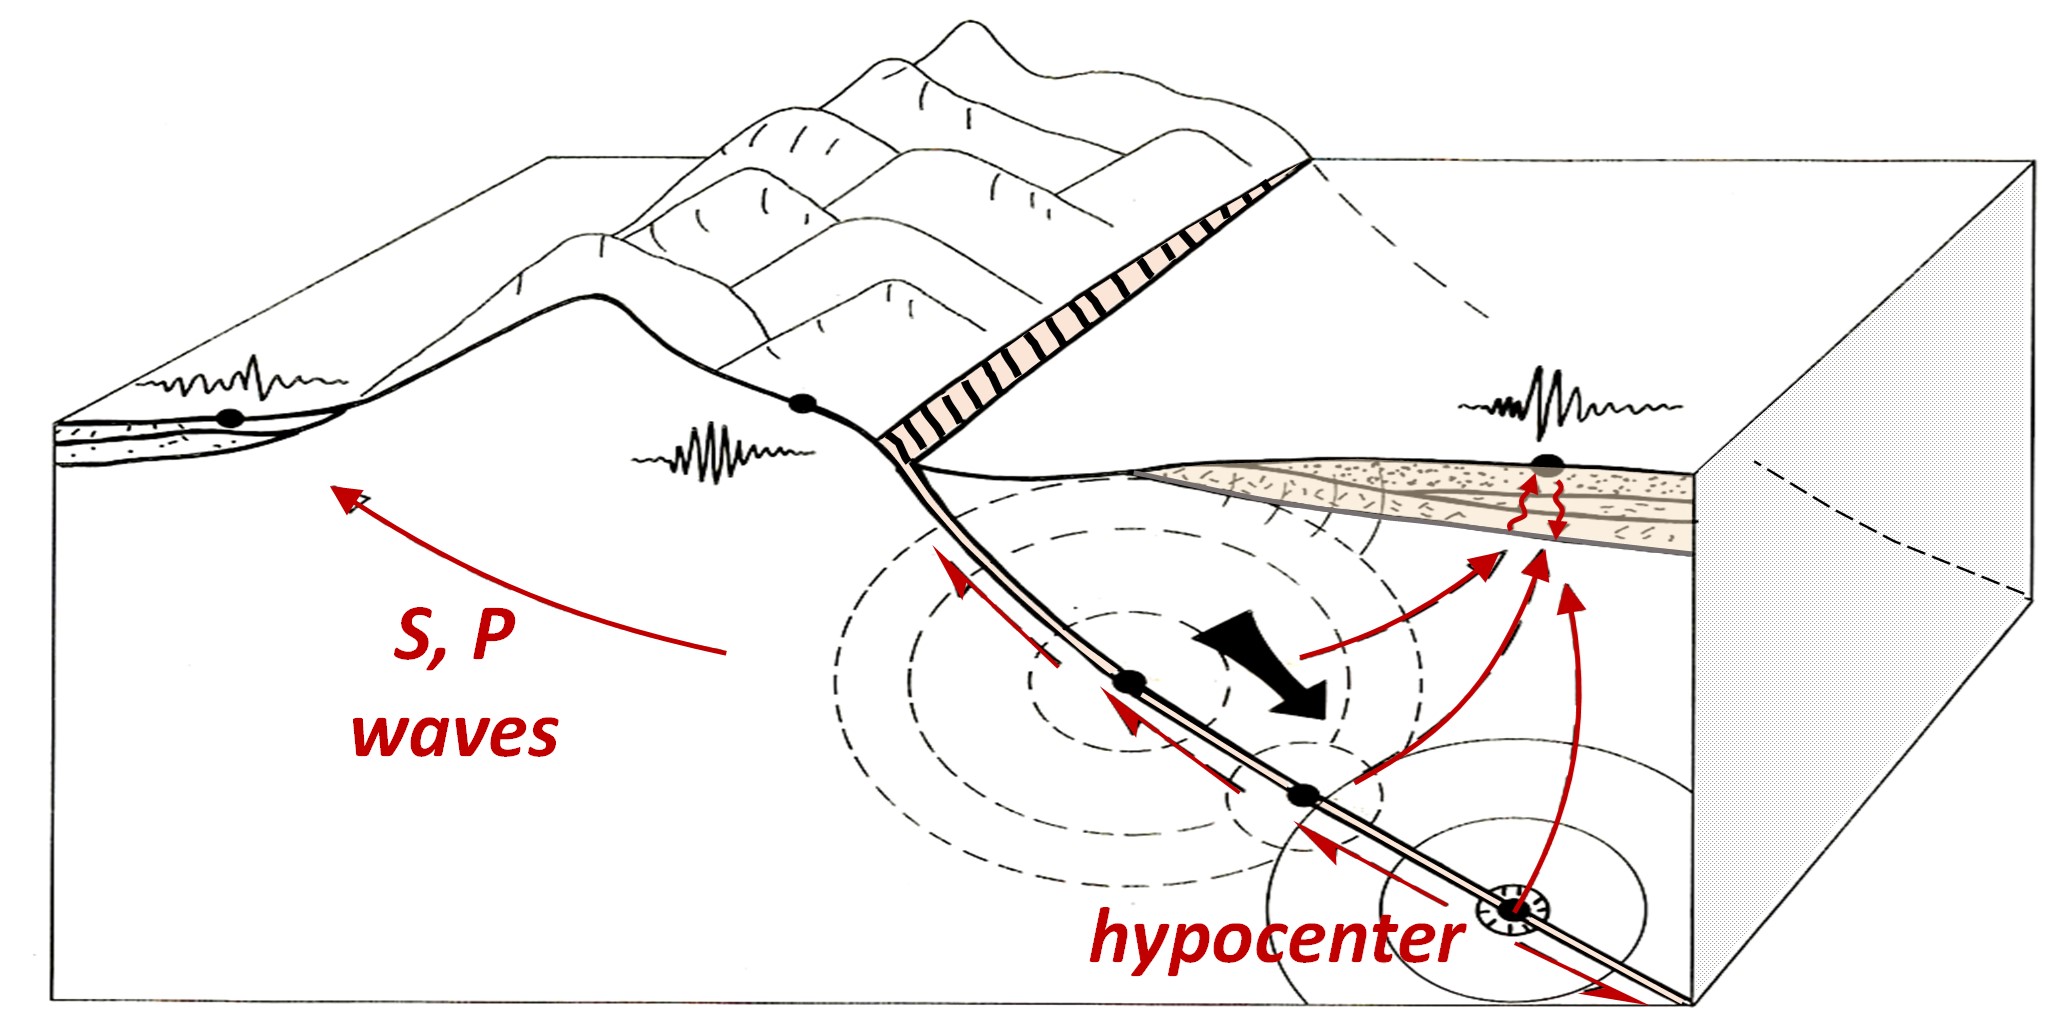 Waves emanated from the seismic fault travelling towards the ground surface.